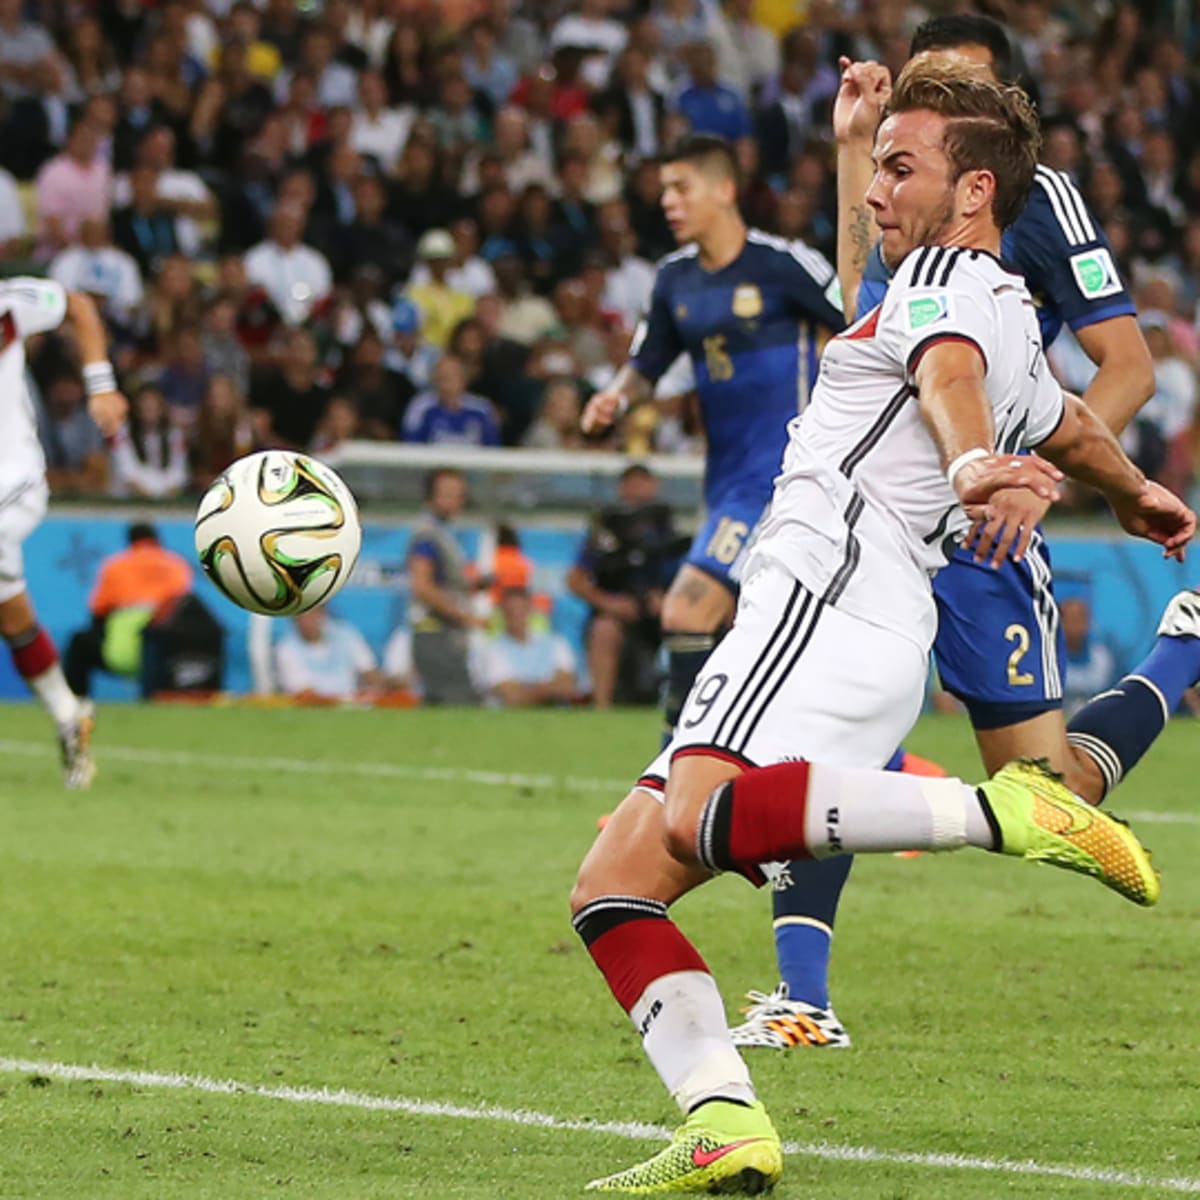 Germany's positive tactical approach rewarded with World Cup